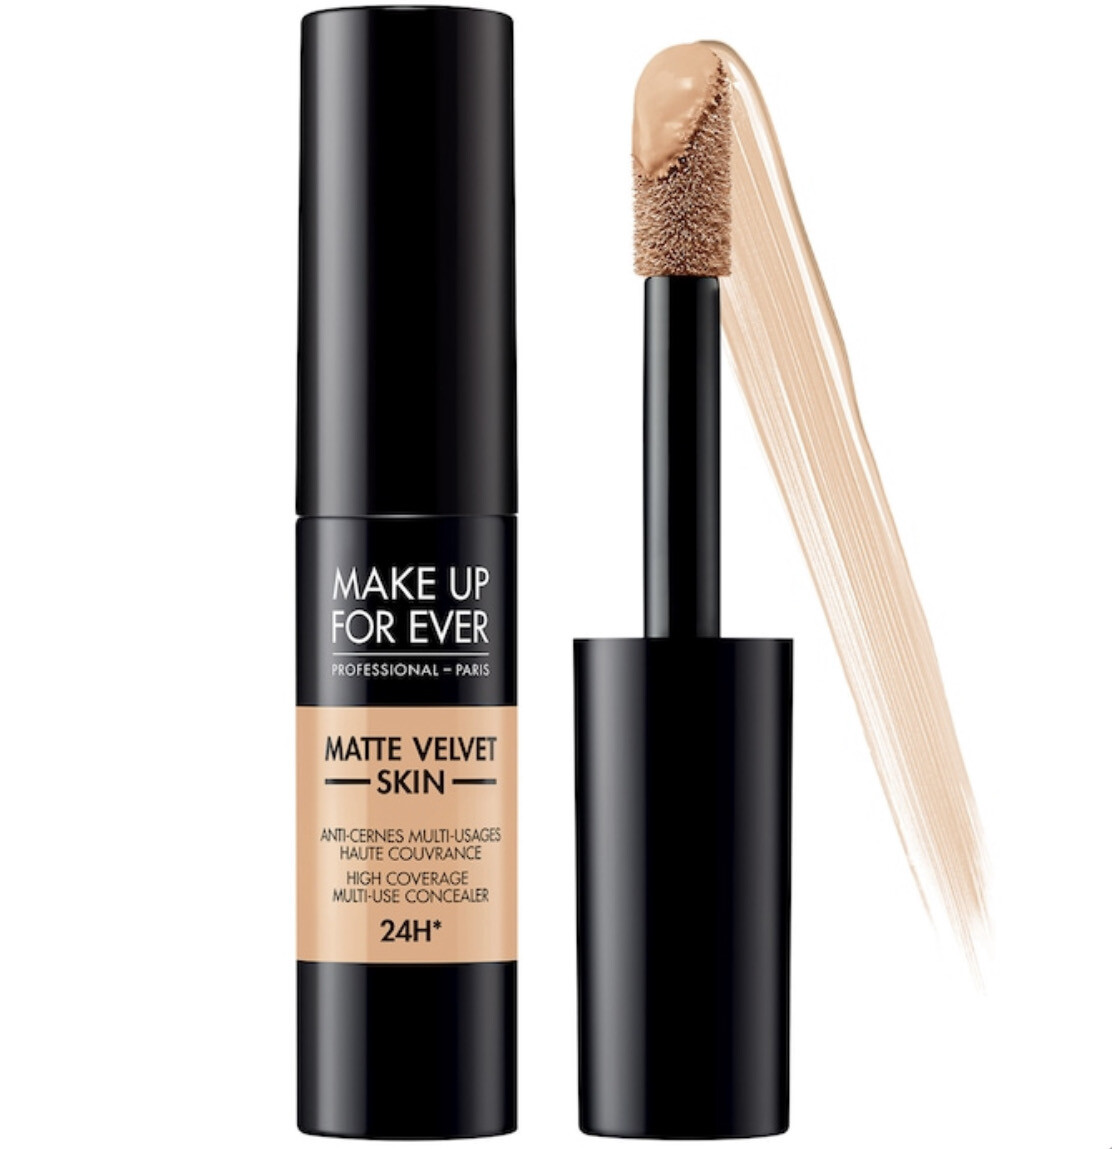 Make Up For Ever - Matte Velvet Skin High Coverage Multi-Use Concealer | 2.2 - Yellow Alabaster - for fair skin with yellow undertones